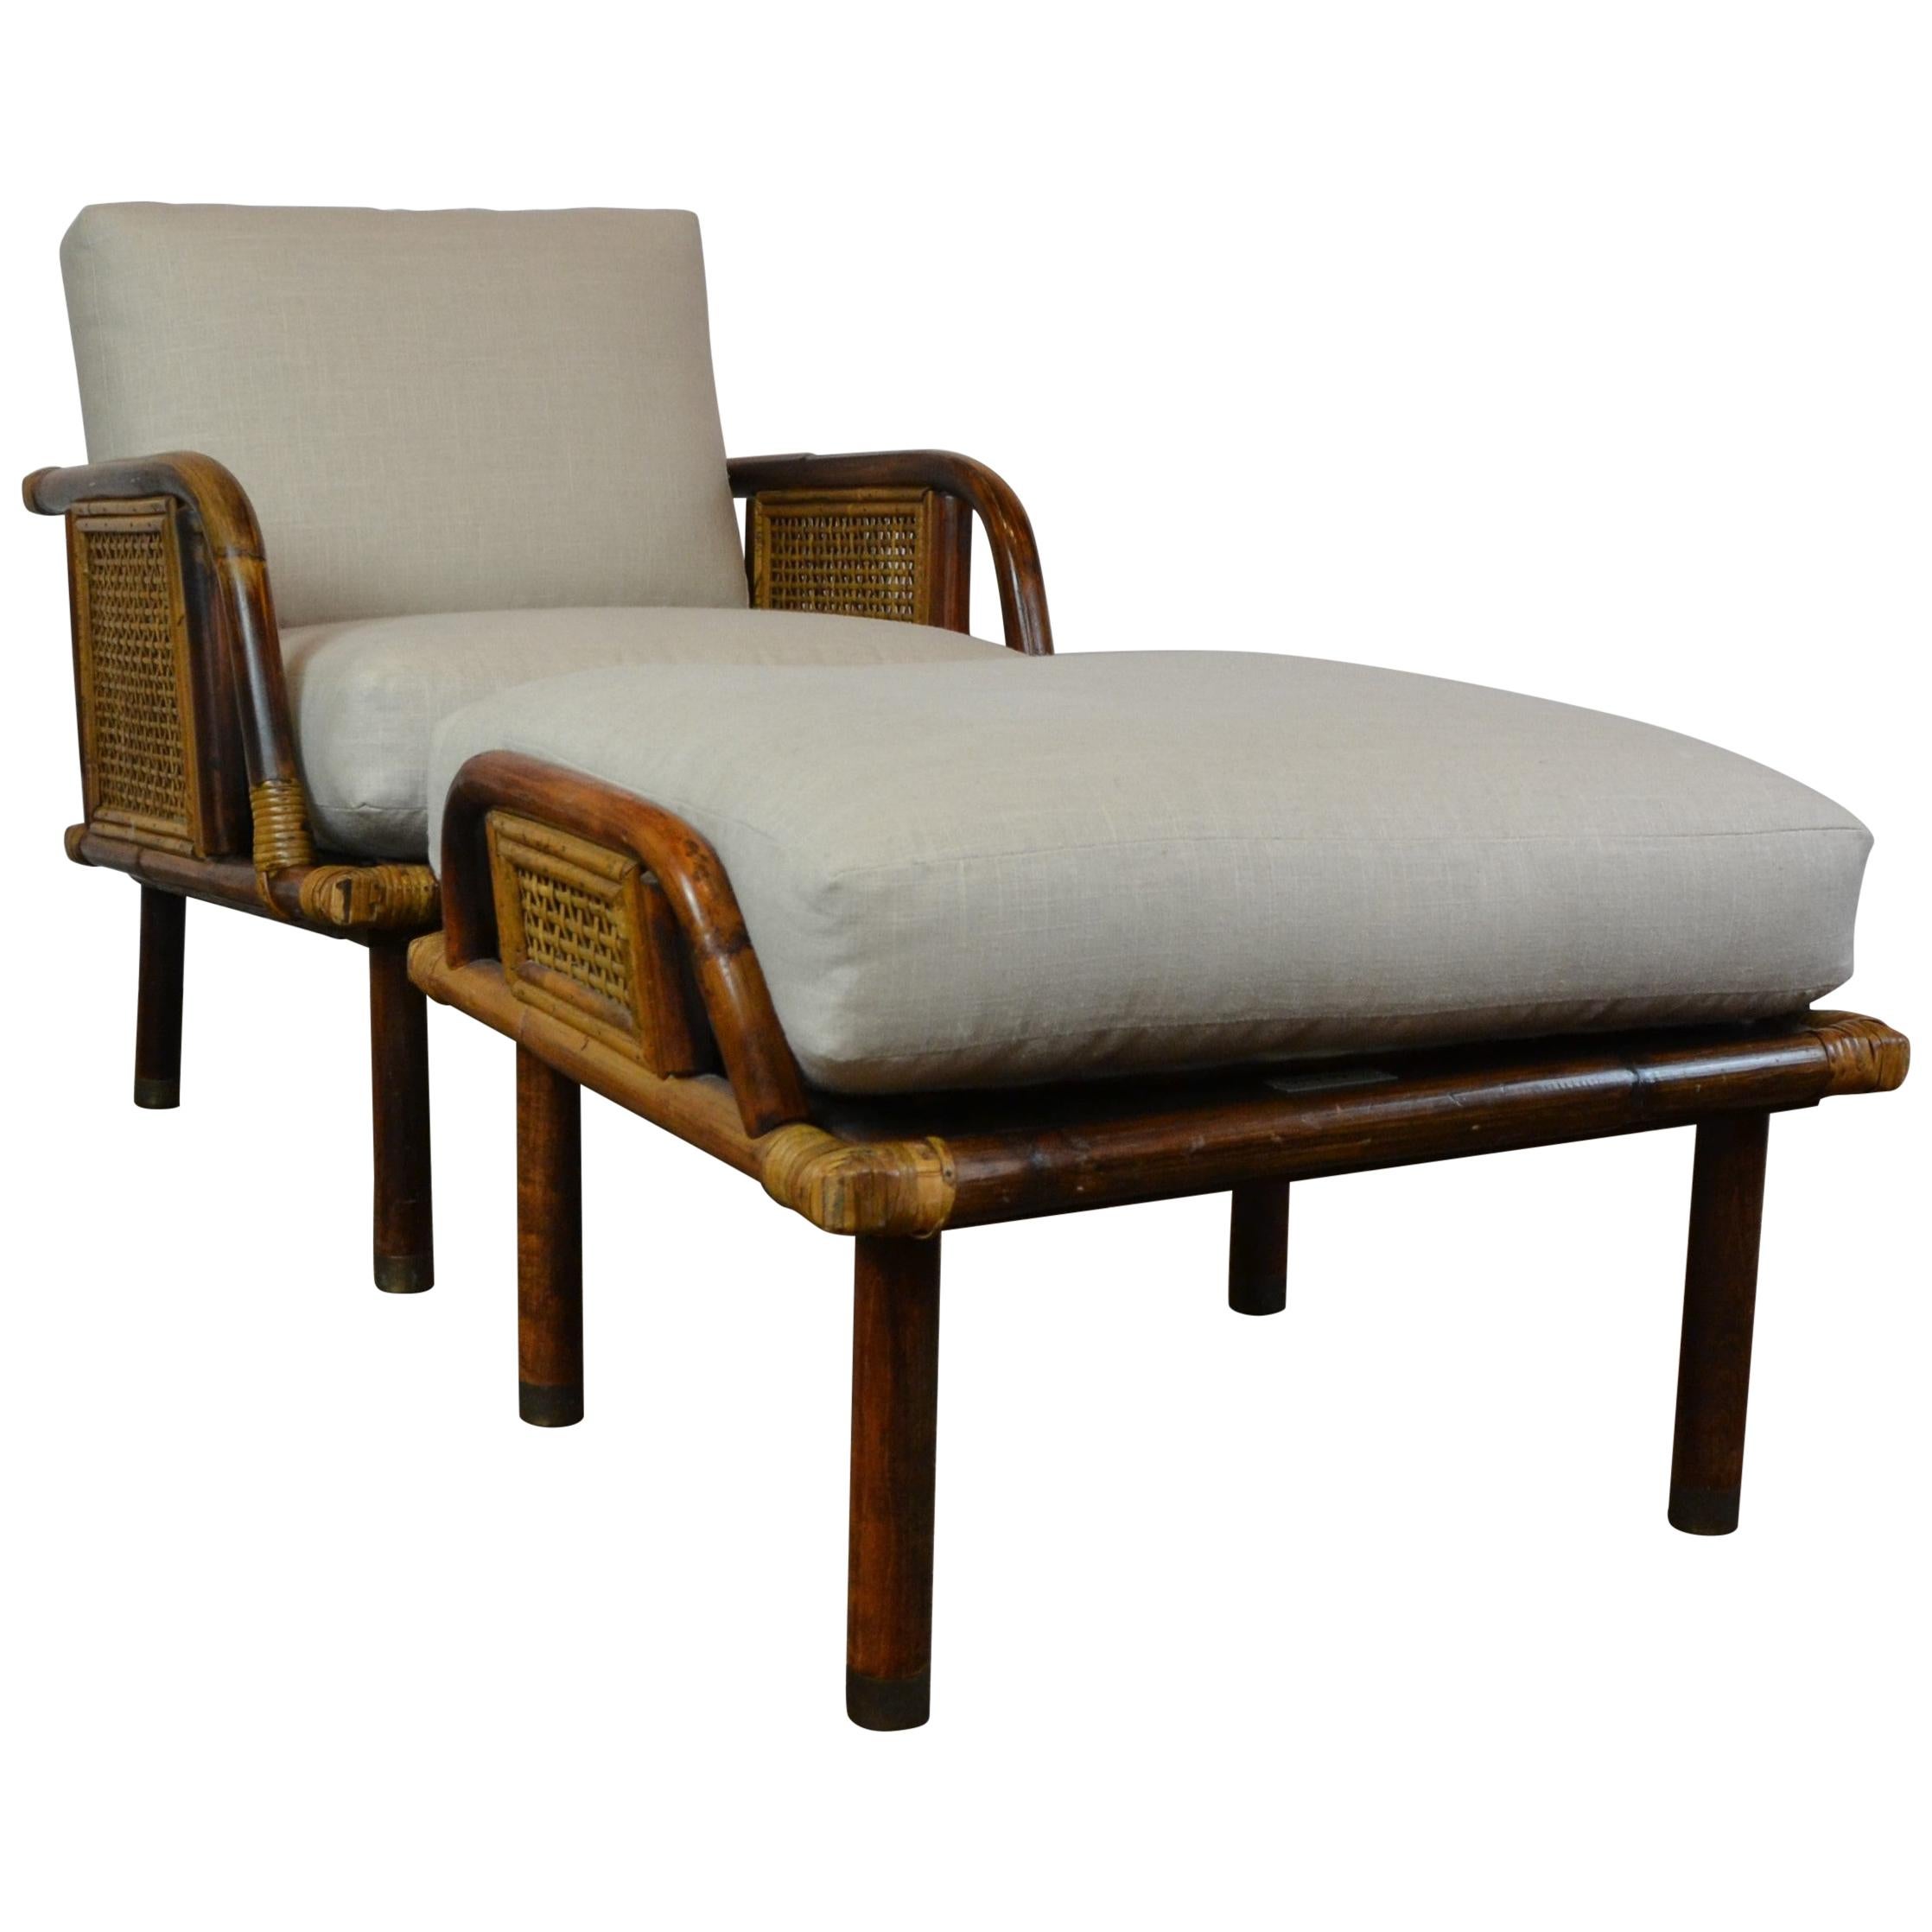 Vintage Rattan and Cane Lounge Chair by Ficks Reed, circa 1950